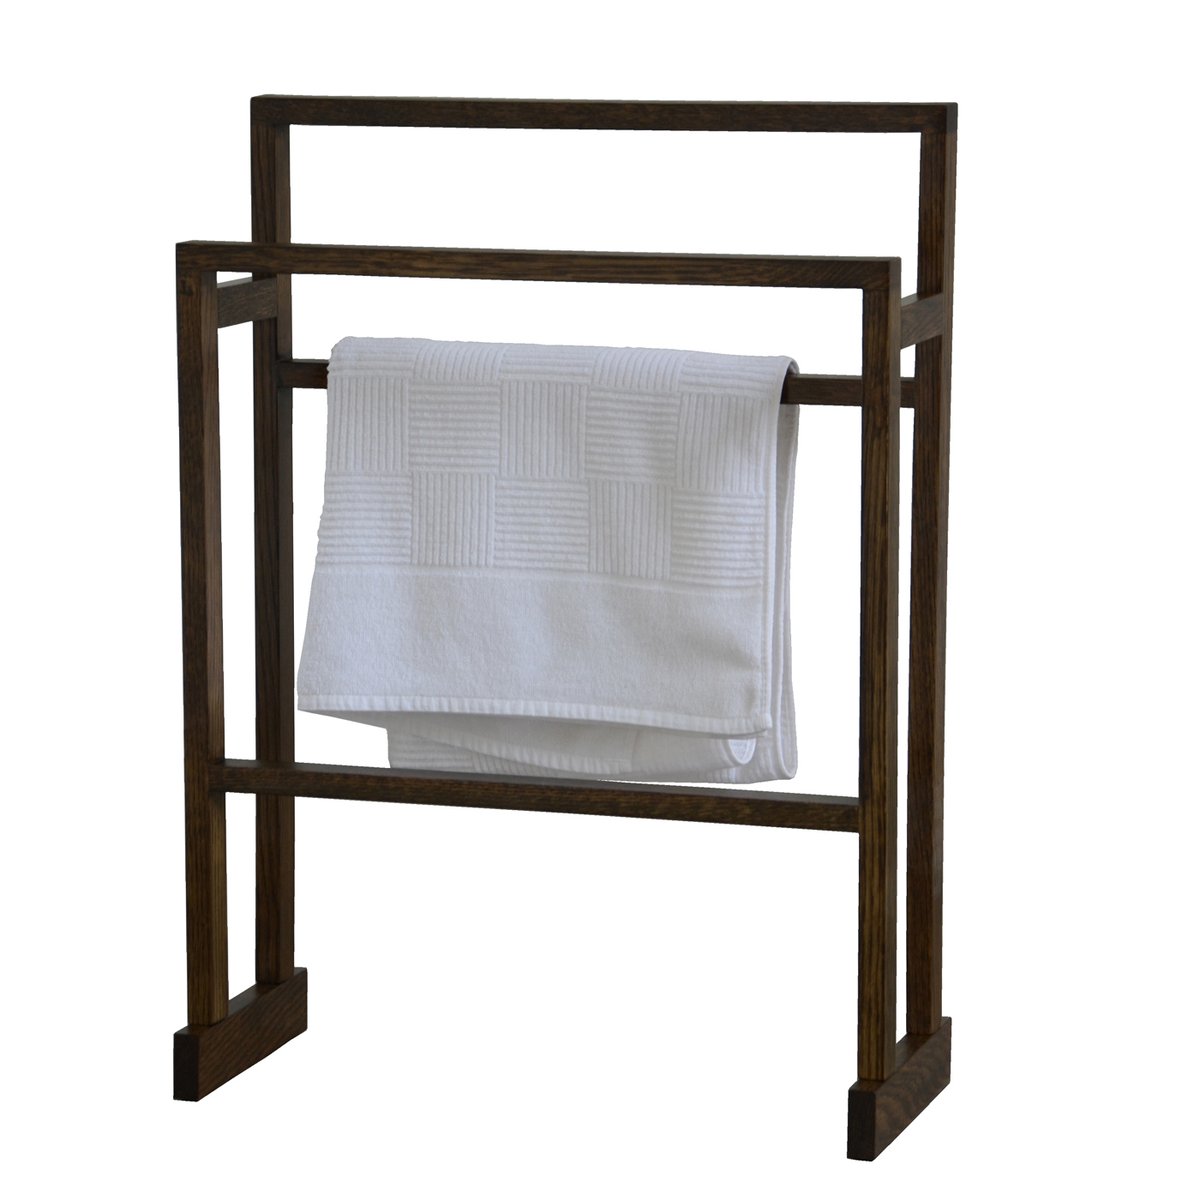 Wireworks Free Standing Towel Rail Dark Oak Medium at Unique Furnishing - Believing that even the most everyday items should have a well-designed home, the Mezza Towel Rail ... uniquefurnishing.co.uk/product/wirewo… #Furniture #CabinetsStorage #VanityUnits #interiordesign #LIKE #RETWEET